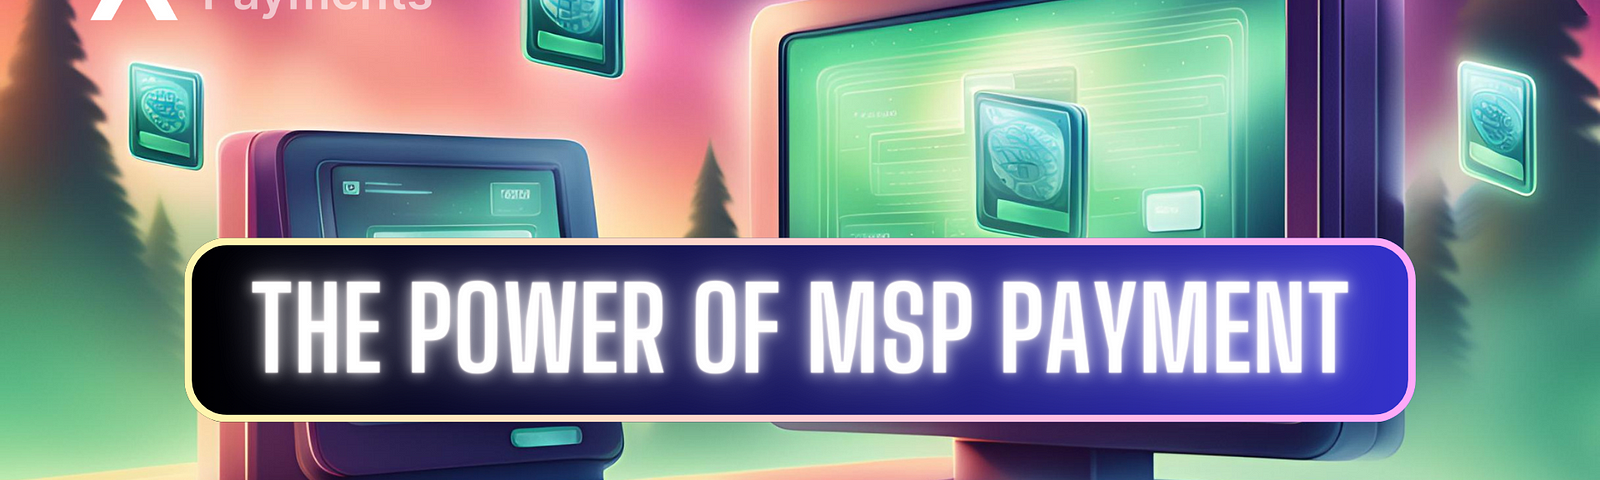 A digital art graphic image showing a digital representation of a smooth transaction process symbolizes the seamless nature of MSP payment systems. In a text box with a glowing effect, the text “The Power of MSP Payment” is written with the Alternative Payments graphic and title logo in the top left corner. The color scheme uses dynamic gradients accompanied by computers and payment processing machines.